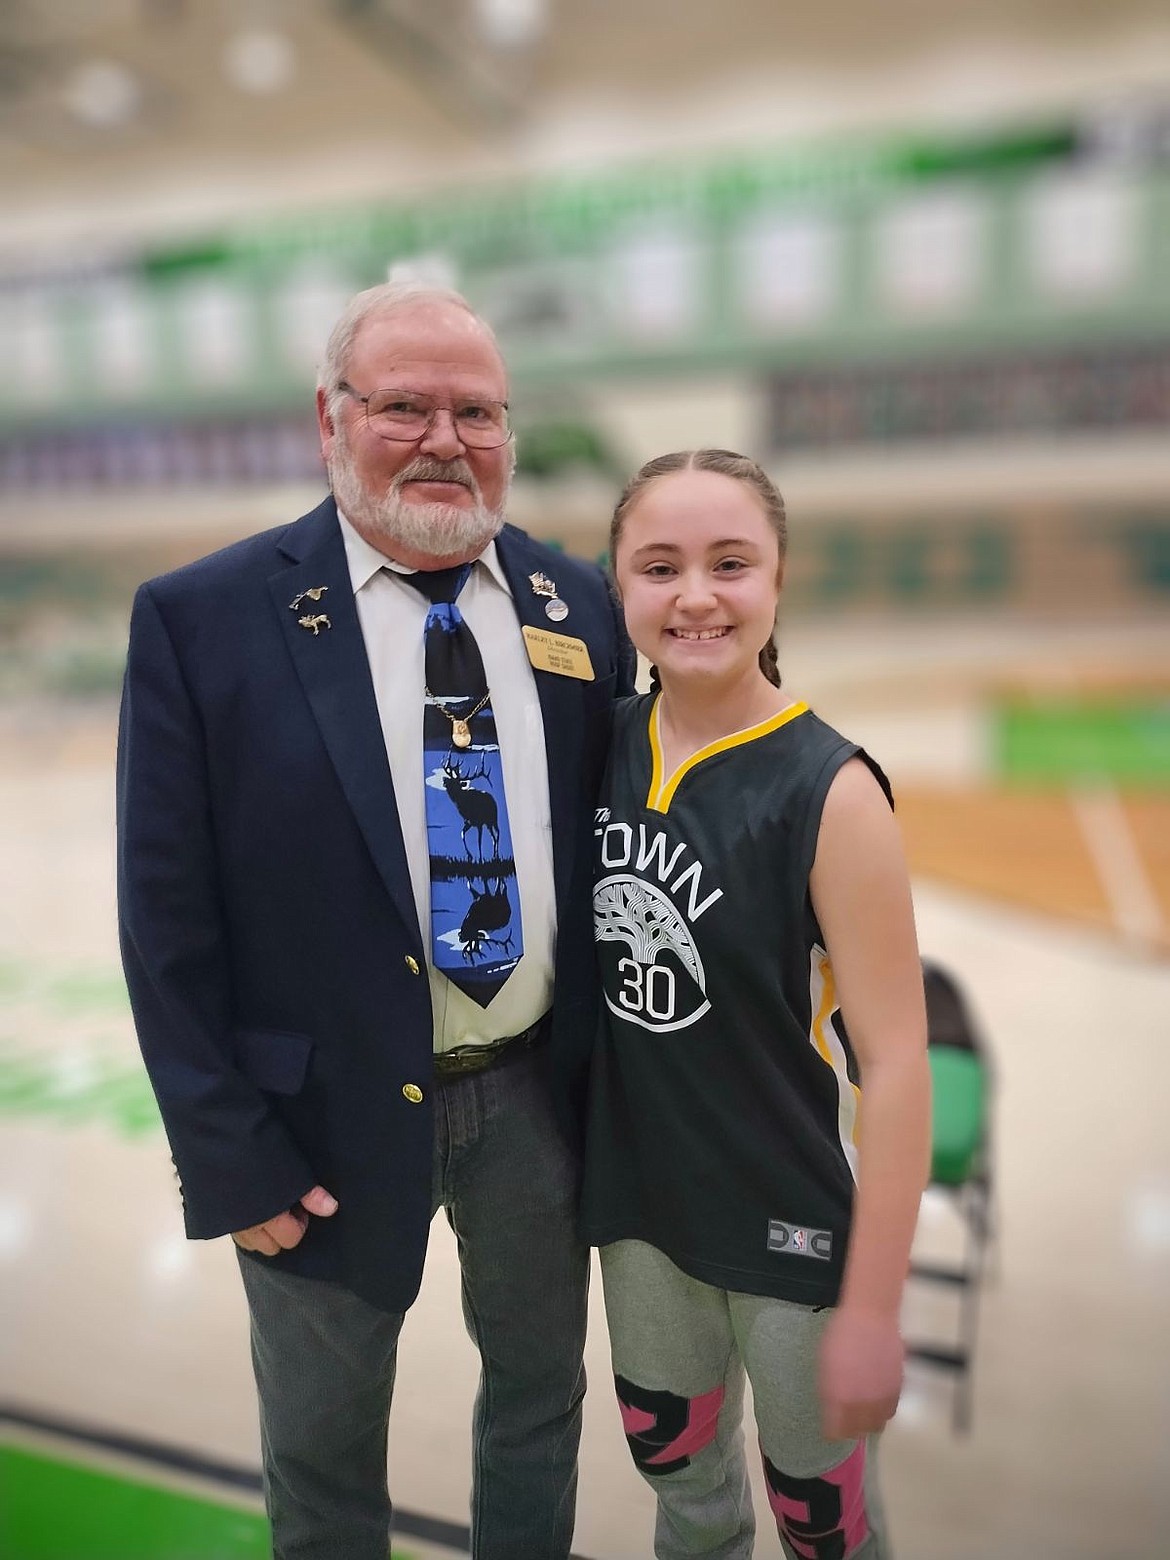 Courtesy photo
Eva Berzoza, right, poses with Harley Birchmier, Idaho State Hoop Shoot Director, after she won the State Elks Hoop Shoot recently at Blackfoot High School. Eva, 13, of Coeur d'Alene, made 20 of 25 free throws to win the girls 12-13 age division. Before that, Eva won the District Elks Hoop Shoot in Kellogg on Jan. 20. Eva, a seventh grader at Lakes Middle School, will advance to the Regional Elks Hoop Shoot in Pasco, Wash., March 16.